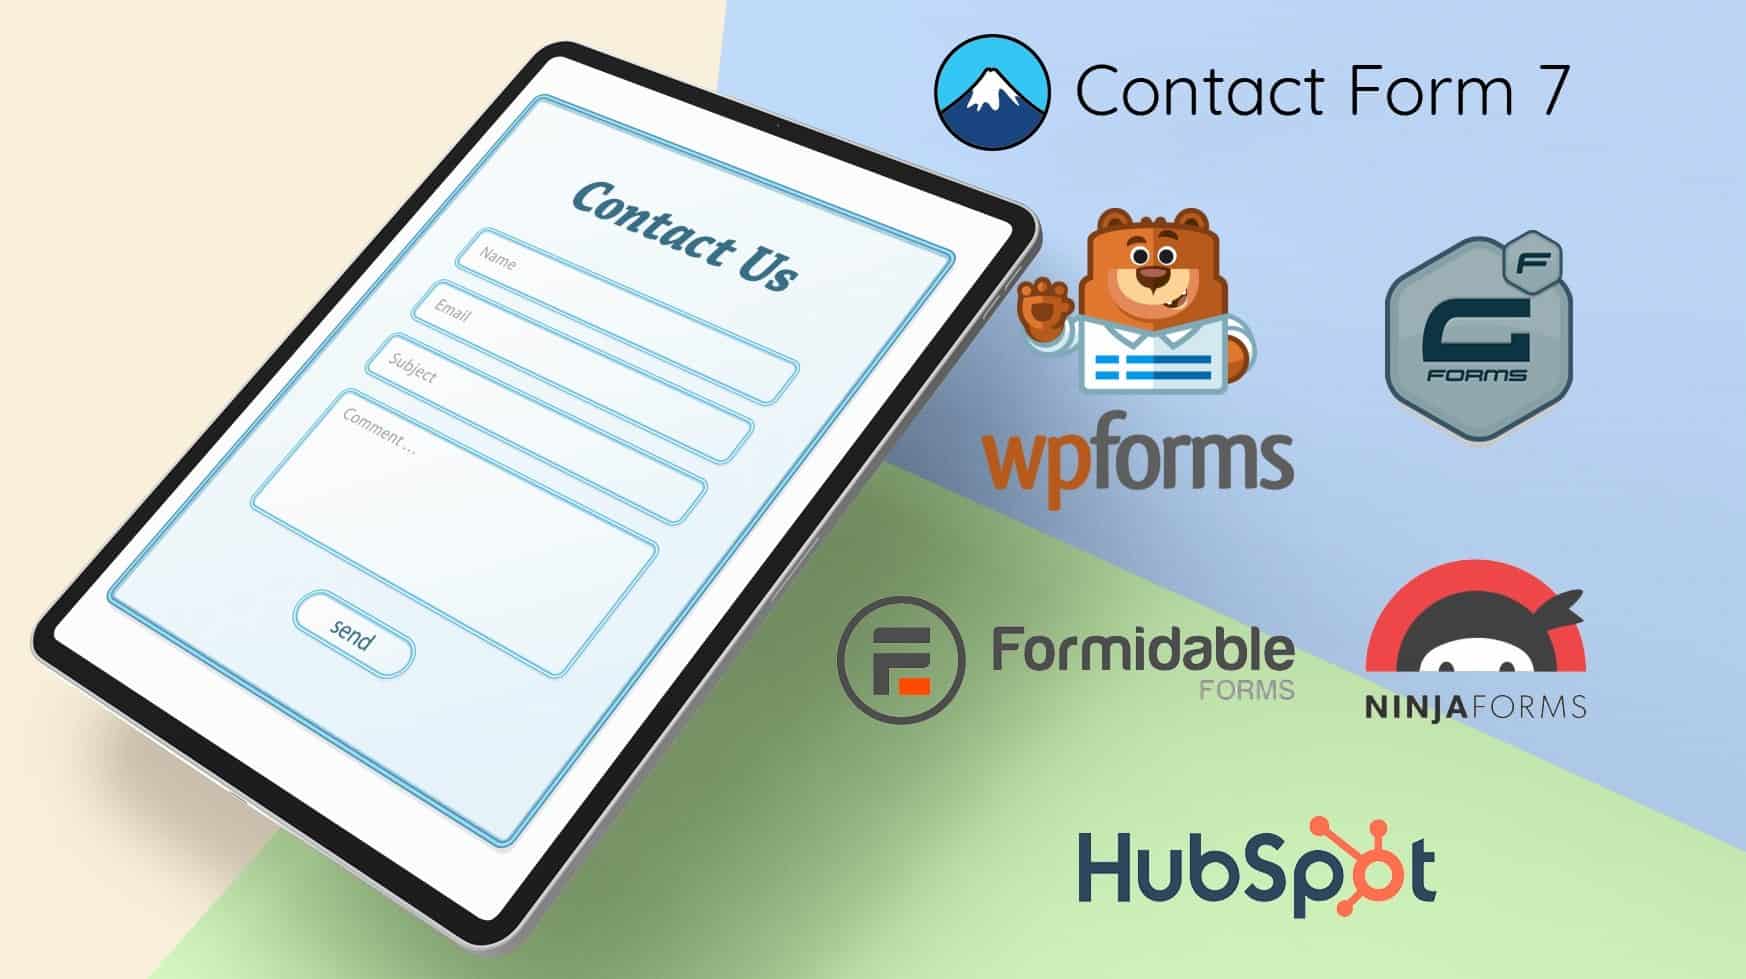 WordPress troubleshooting service for contact forms showing tablet and plugin logos